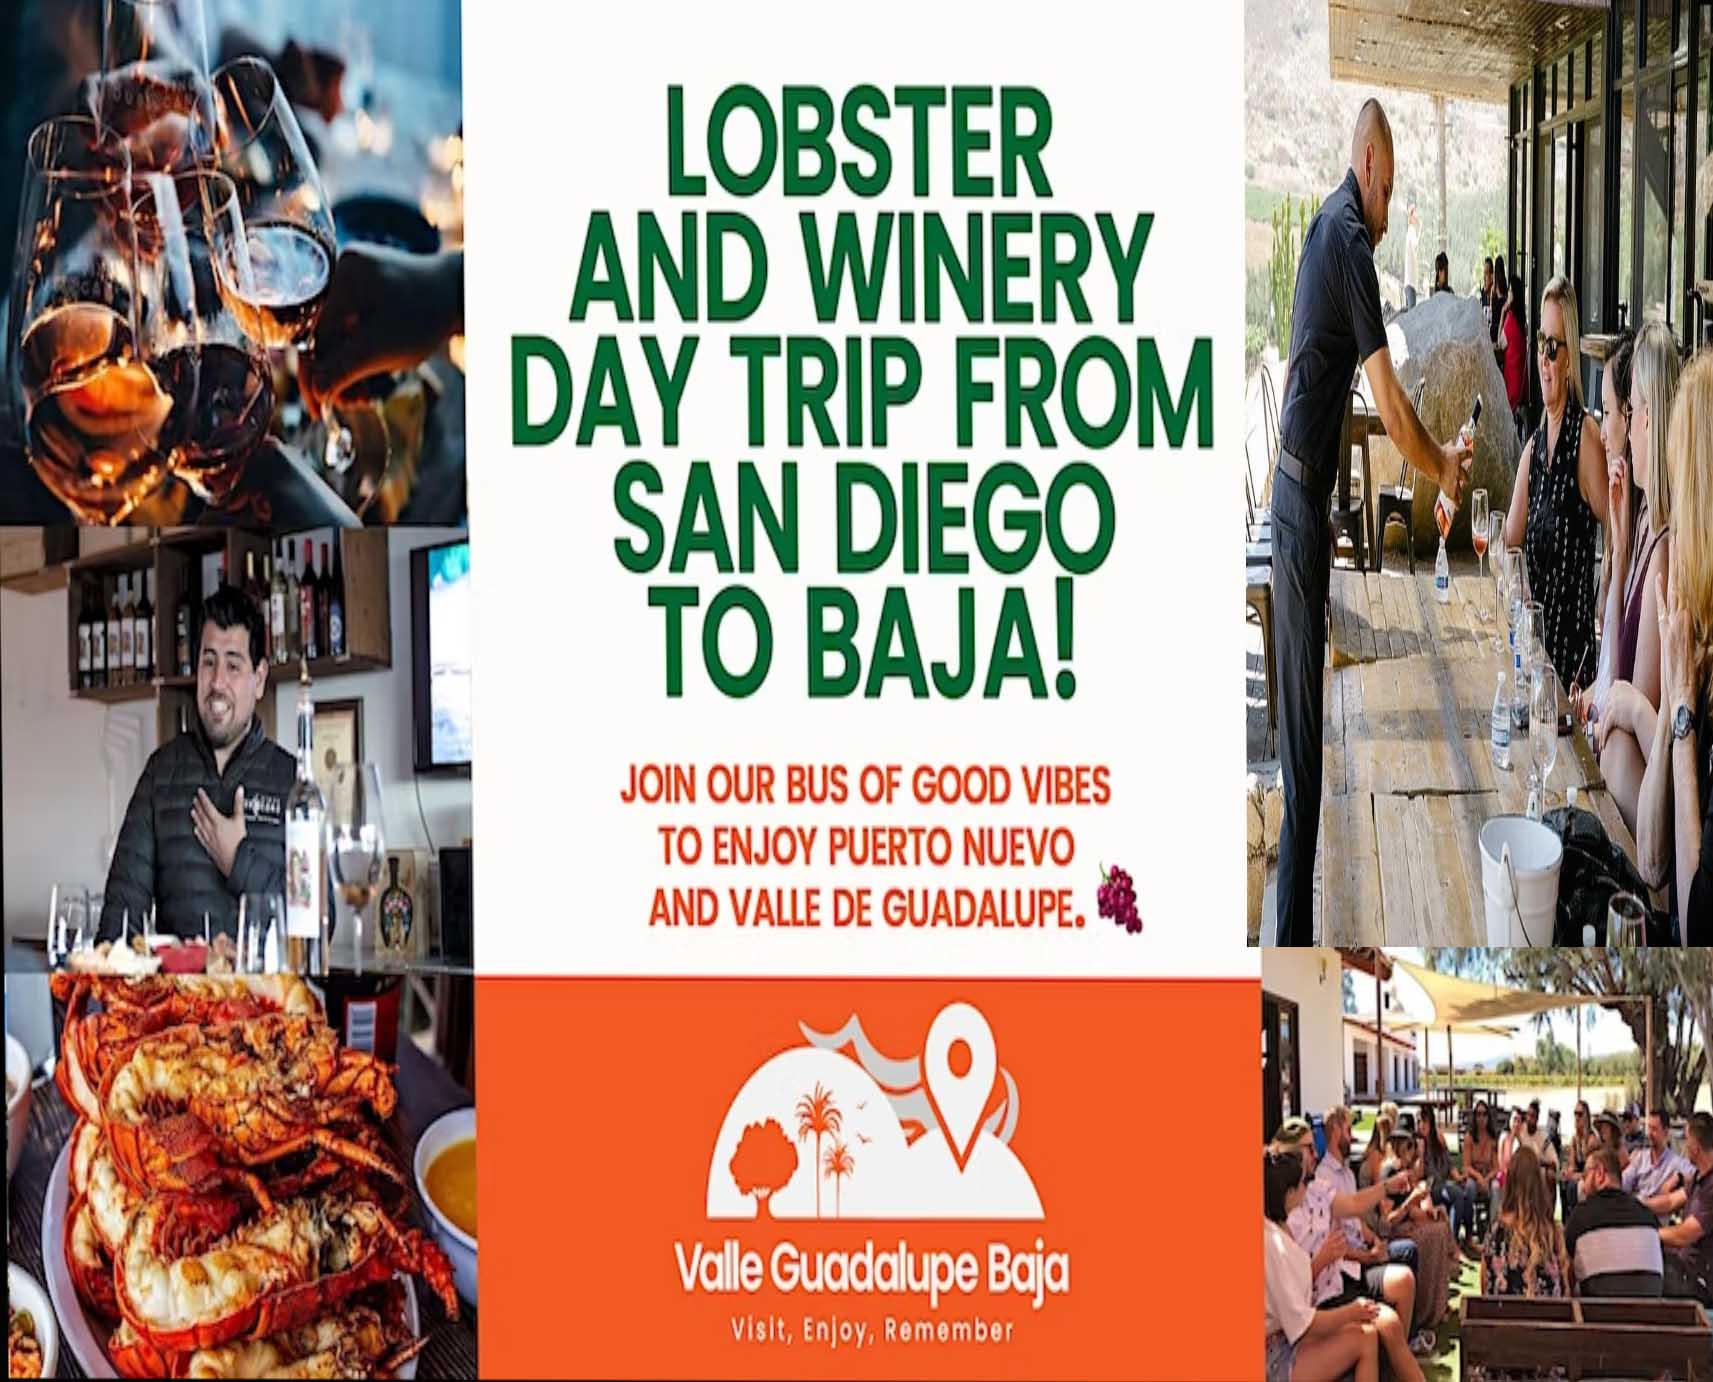 Lobster and Two Winery DayTrip from San Diego to Baja! All Inclusive!